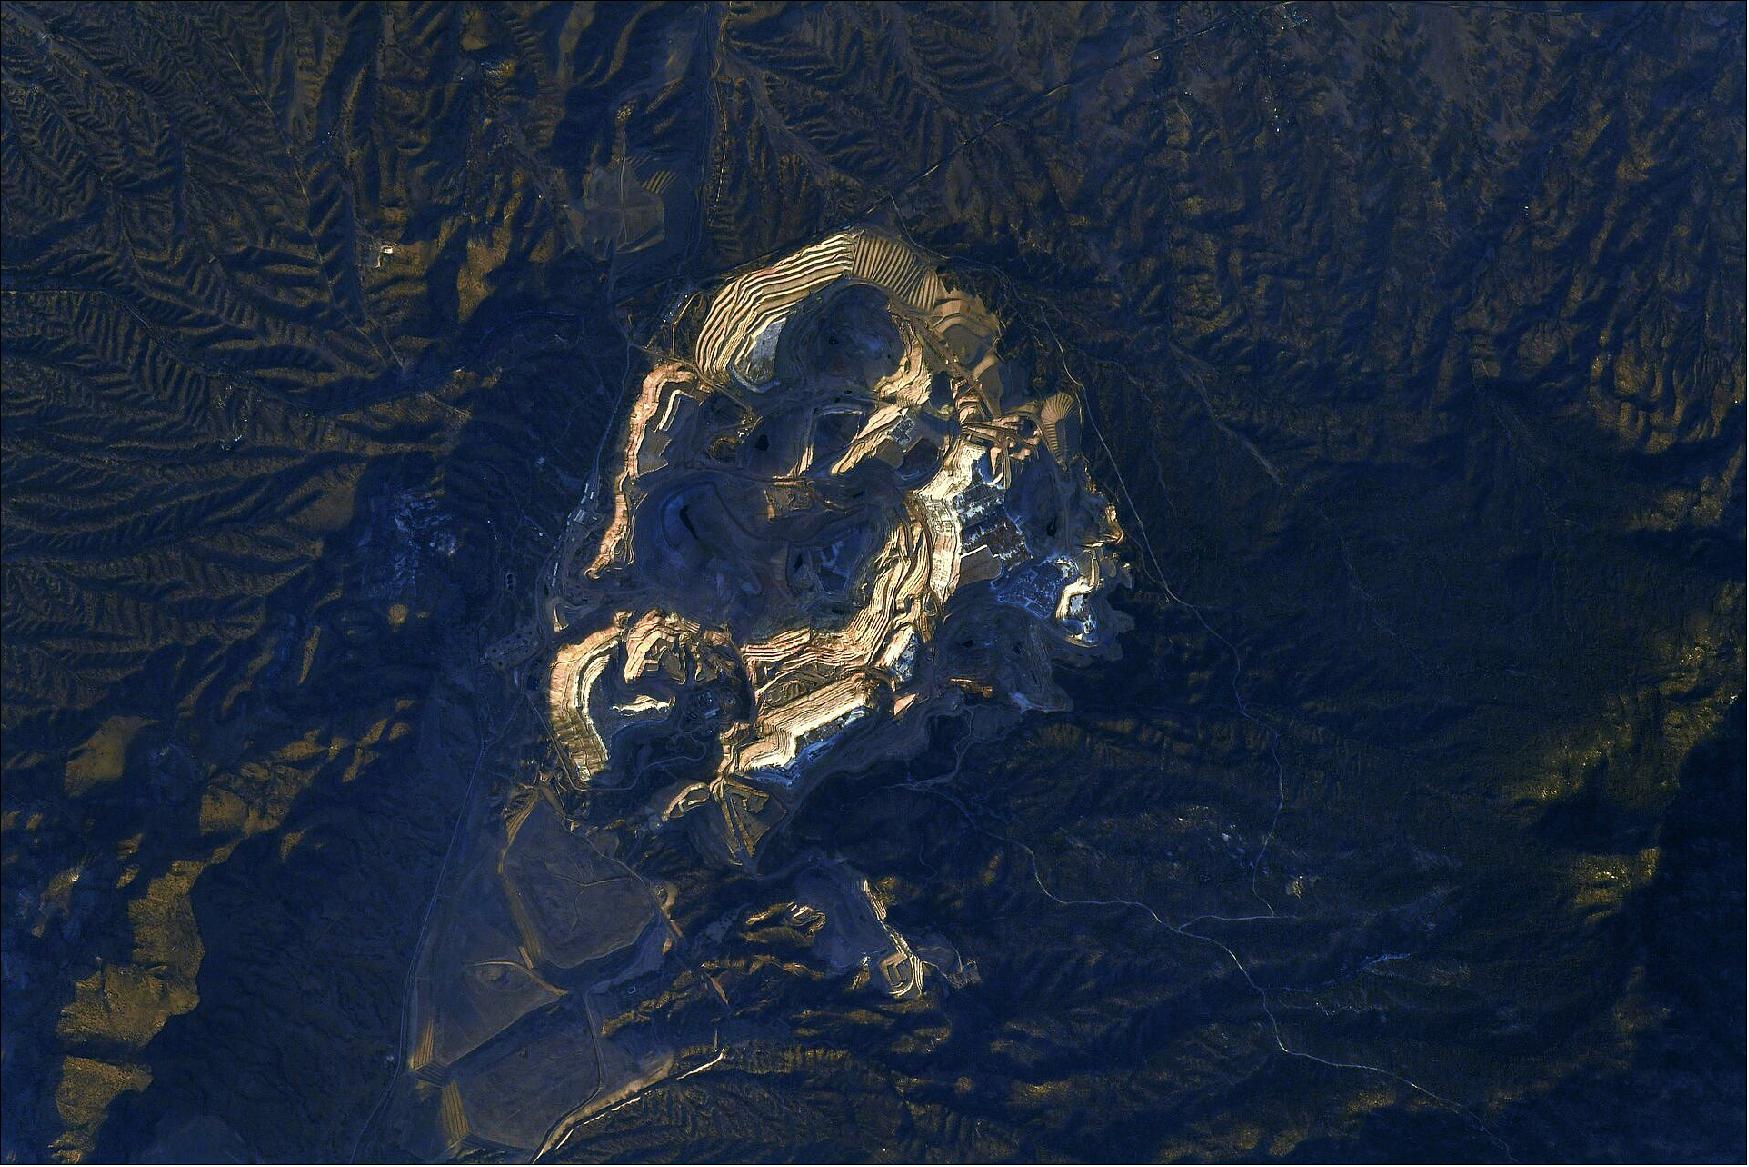 Figure 67: The Tyrone Mine is located in the Burro Mountains Mining District, Grant County, New Mexico, USA (image credit: ESA/NASA–T. Pesquet)